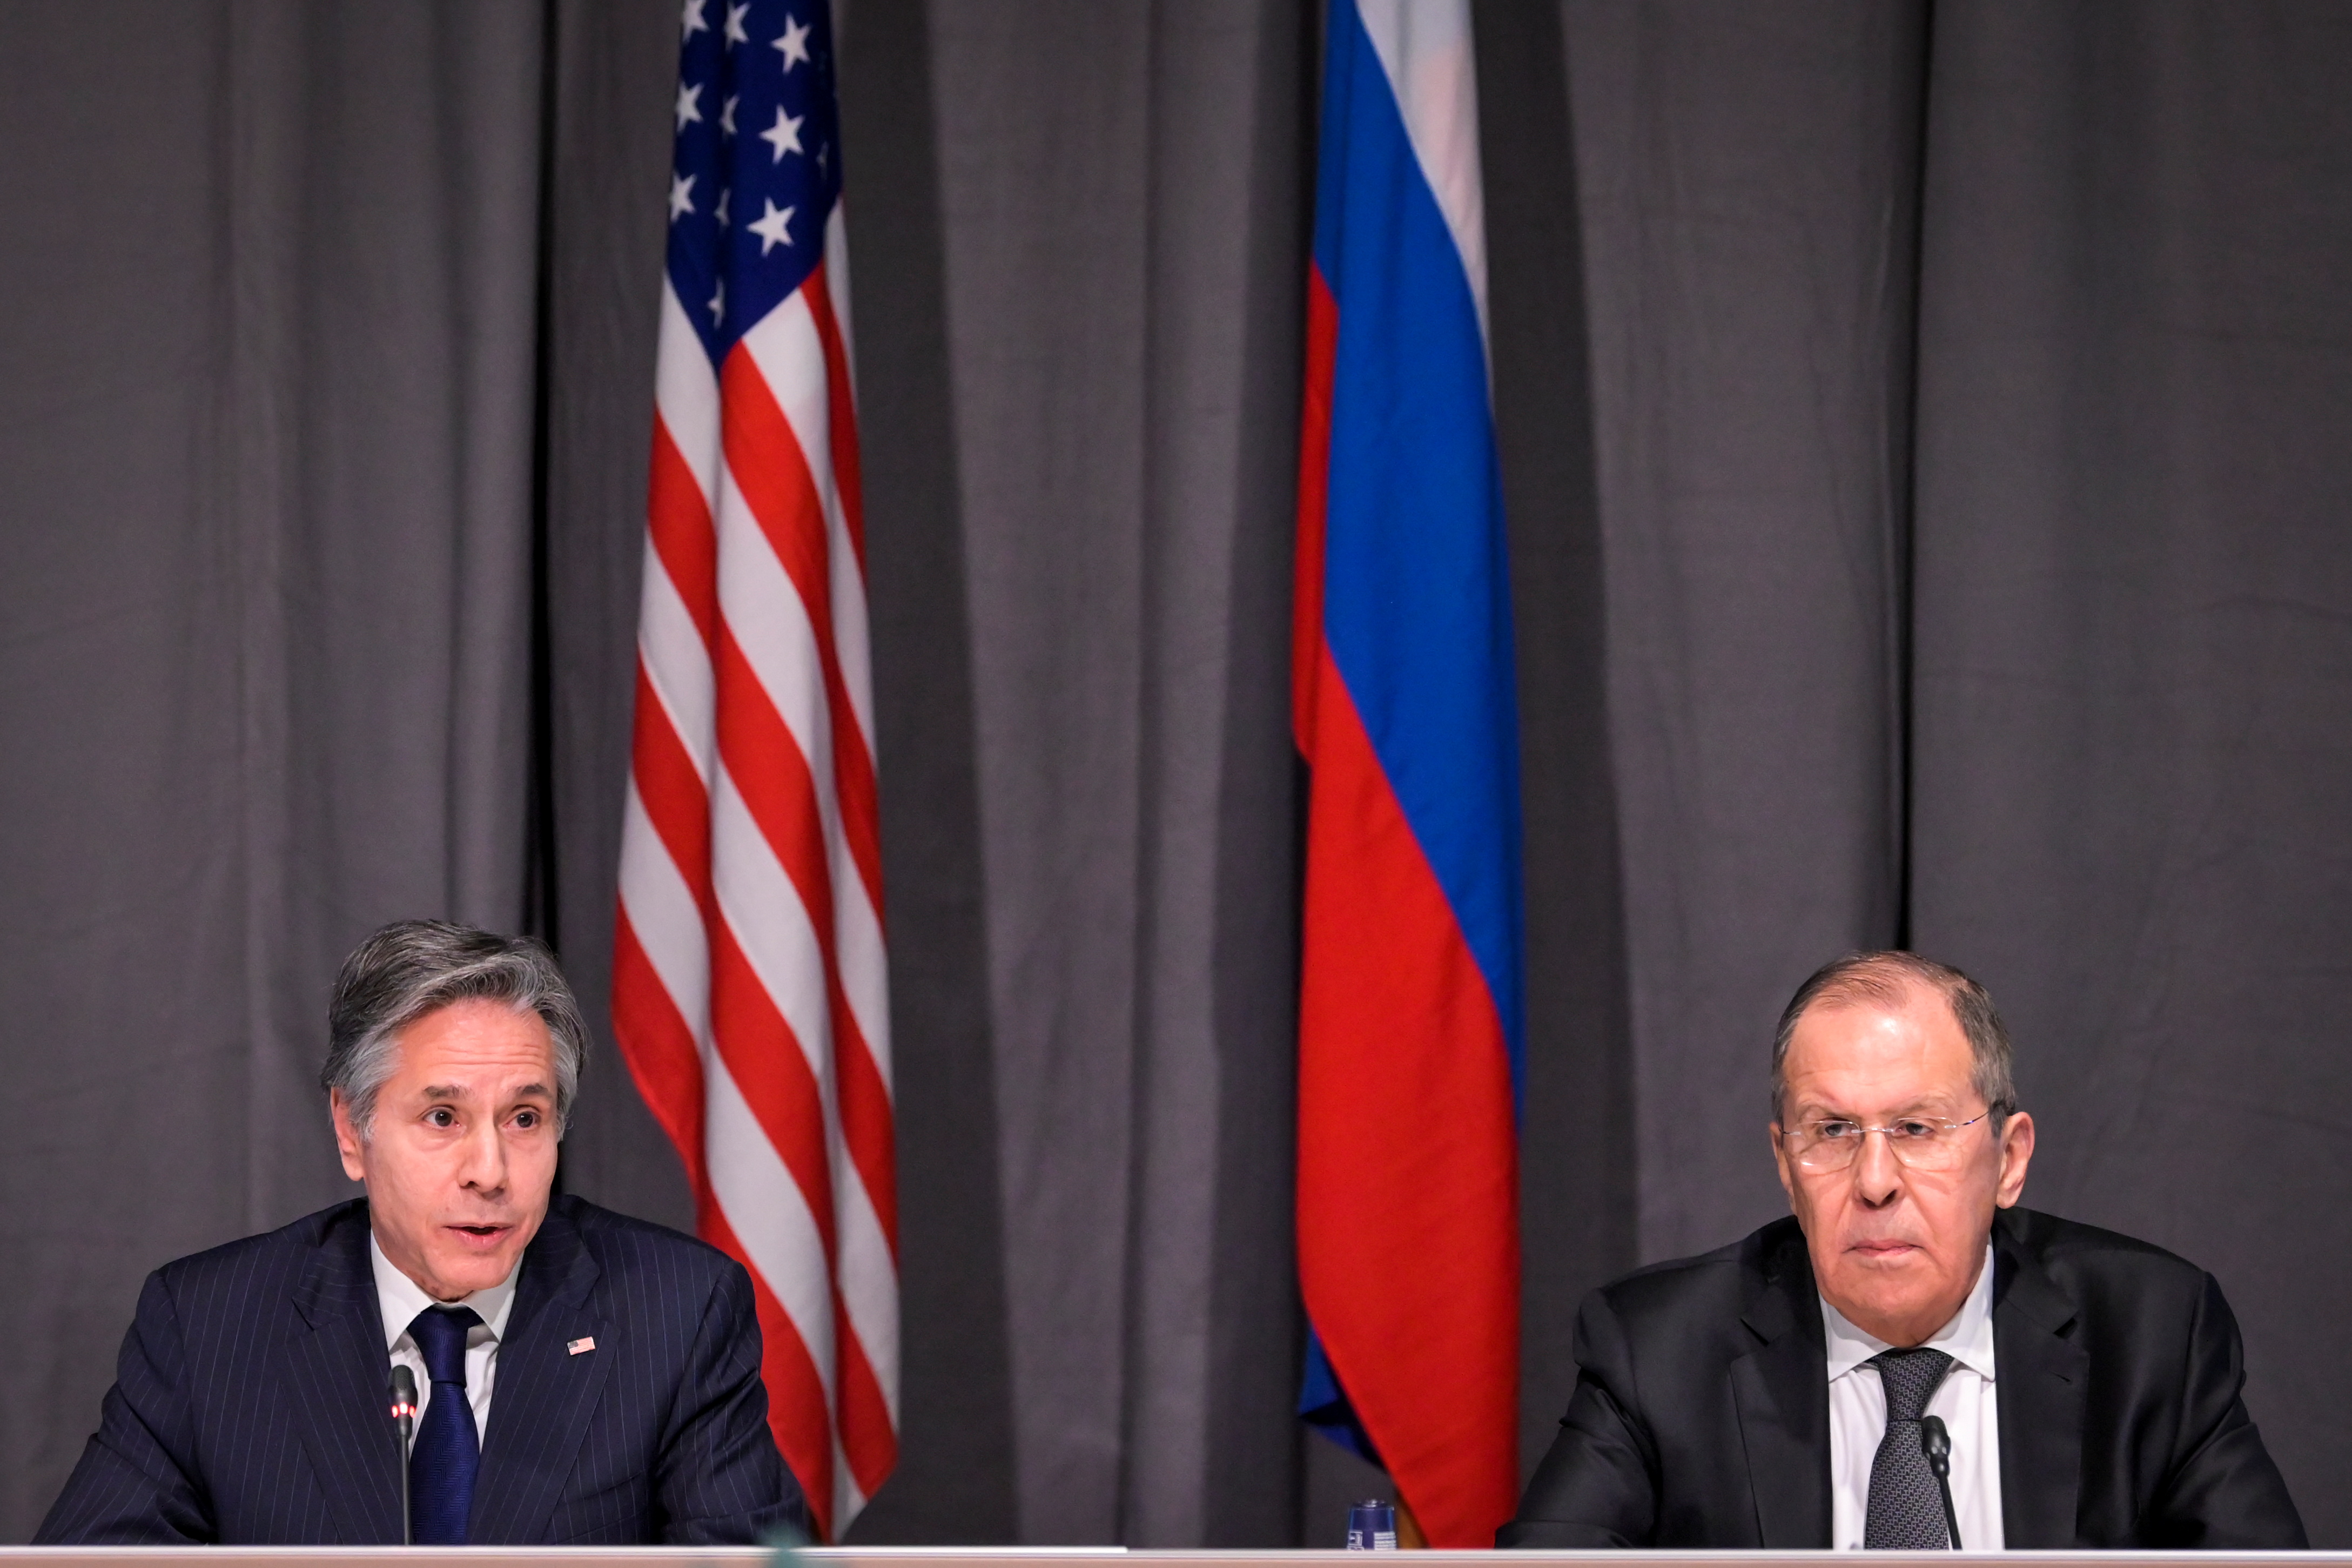 US Secretary of State Antony Blinken meets with Russian Foreign Minister Sergei Lavrov during a meeting of the Organization for Security and Co-operation in Europe, Stockholm, Sweden December 2, 2021. Jonathan Nackstrand/Pool via REUTERS